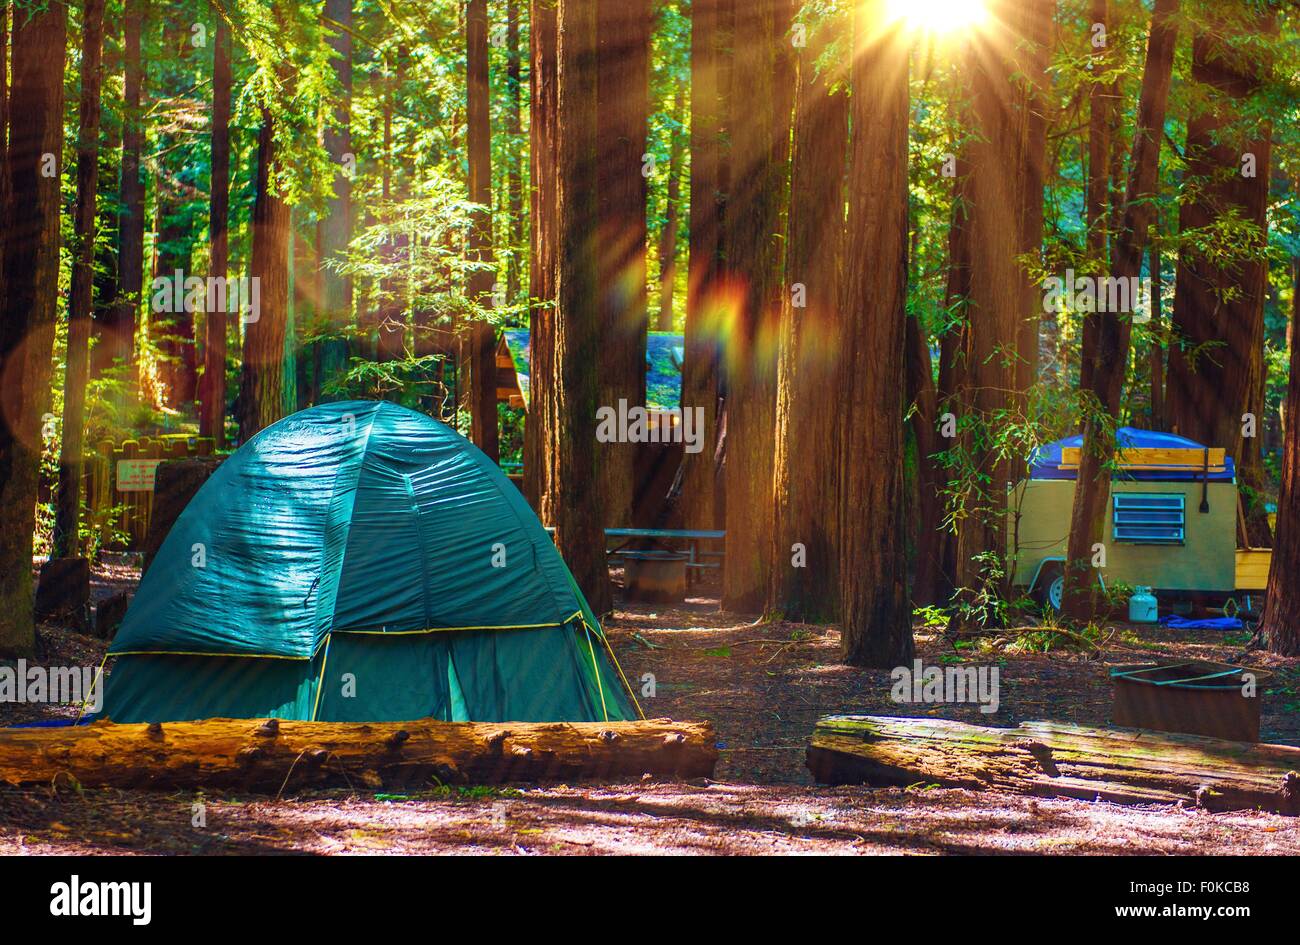 Tent Camping in the Redwood National Park in California, United States. Forest Camping. Stock Photo